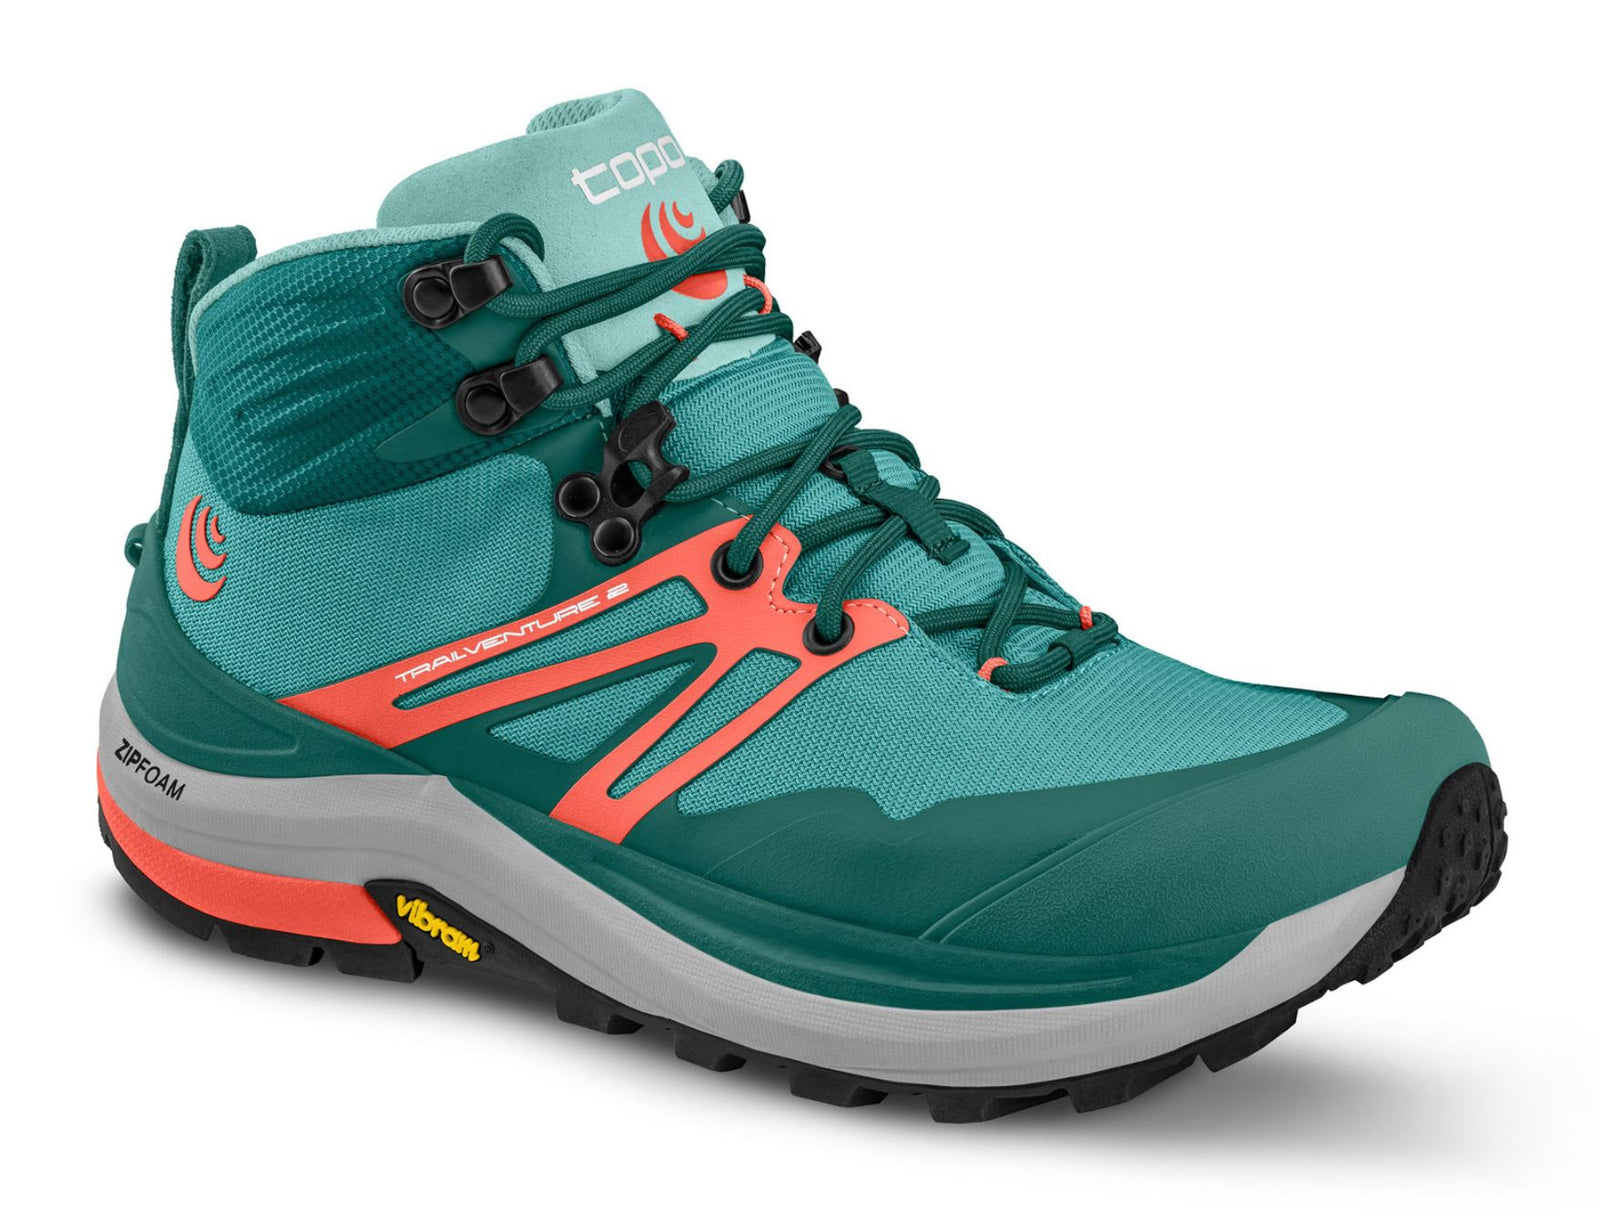 3/4 view of the topo trailventure 2 mid womens in the color teal/coral